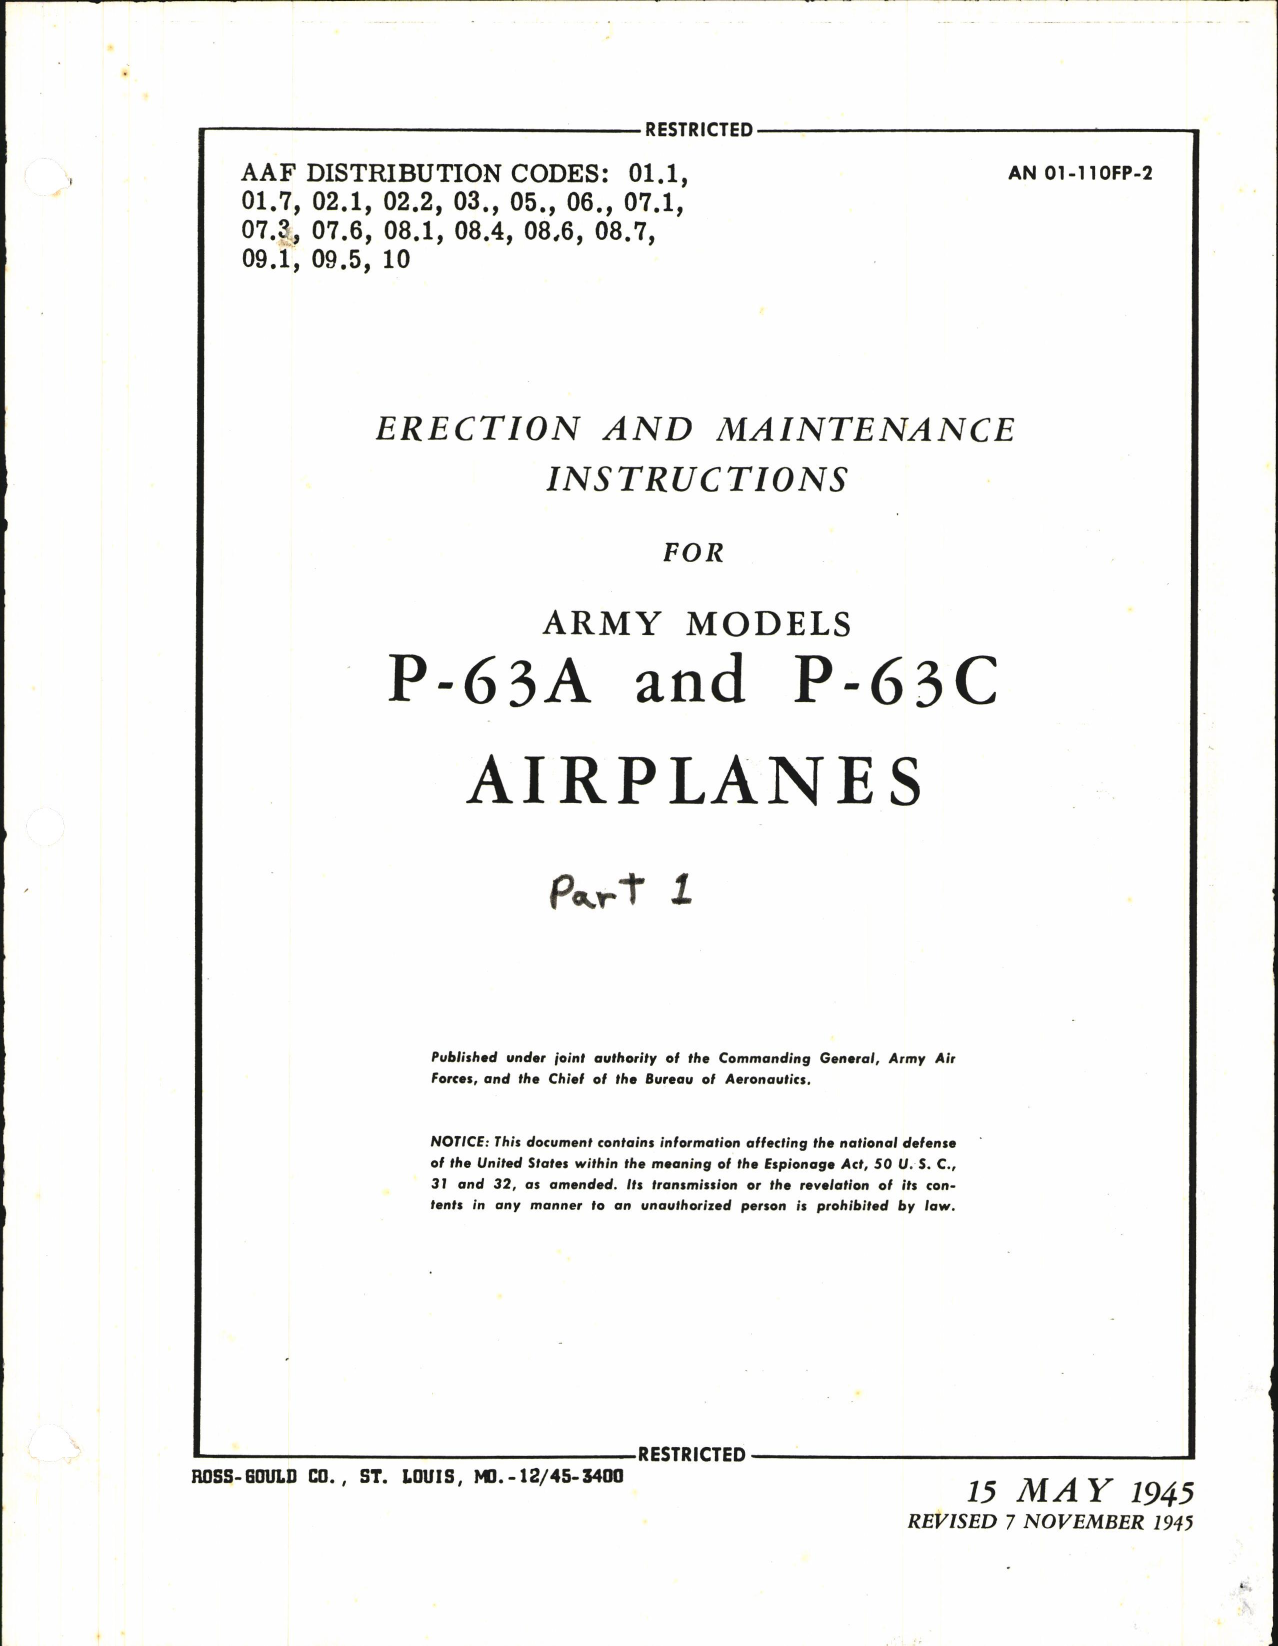 Sample page 1 from AirCorps Library document: Erection and Maintenance Instructions for Army Models P-63A and P-63C 